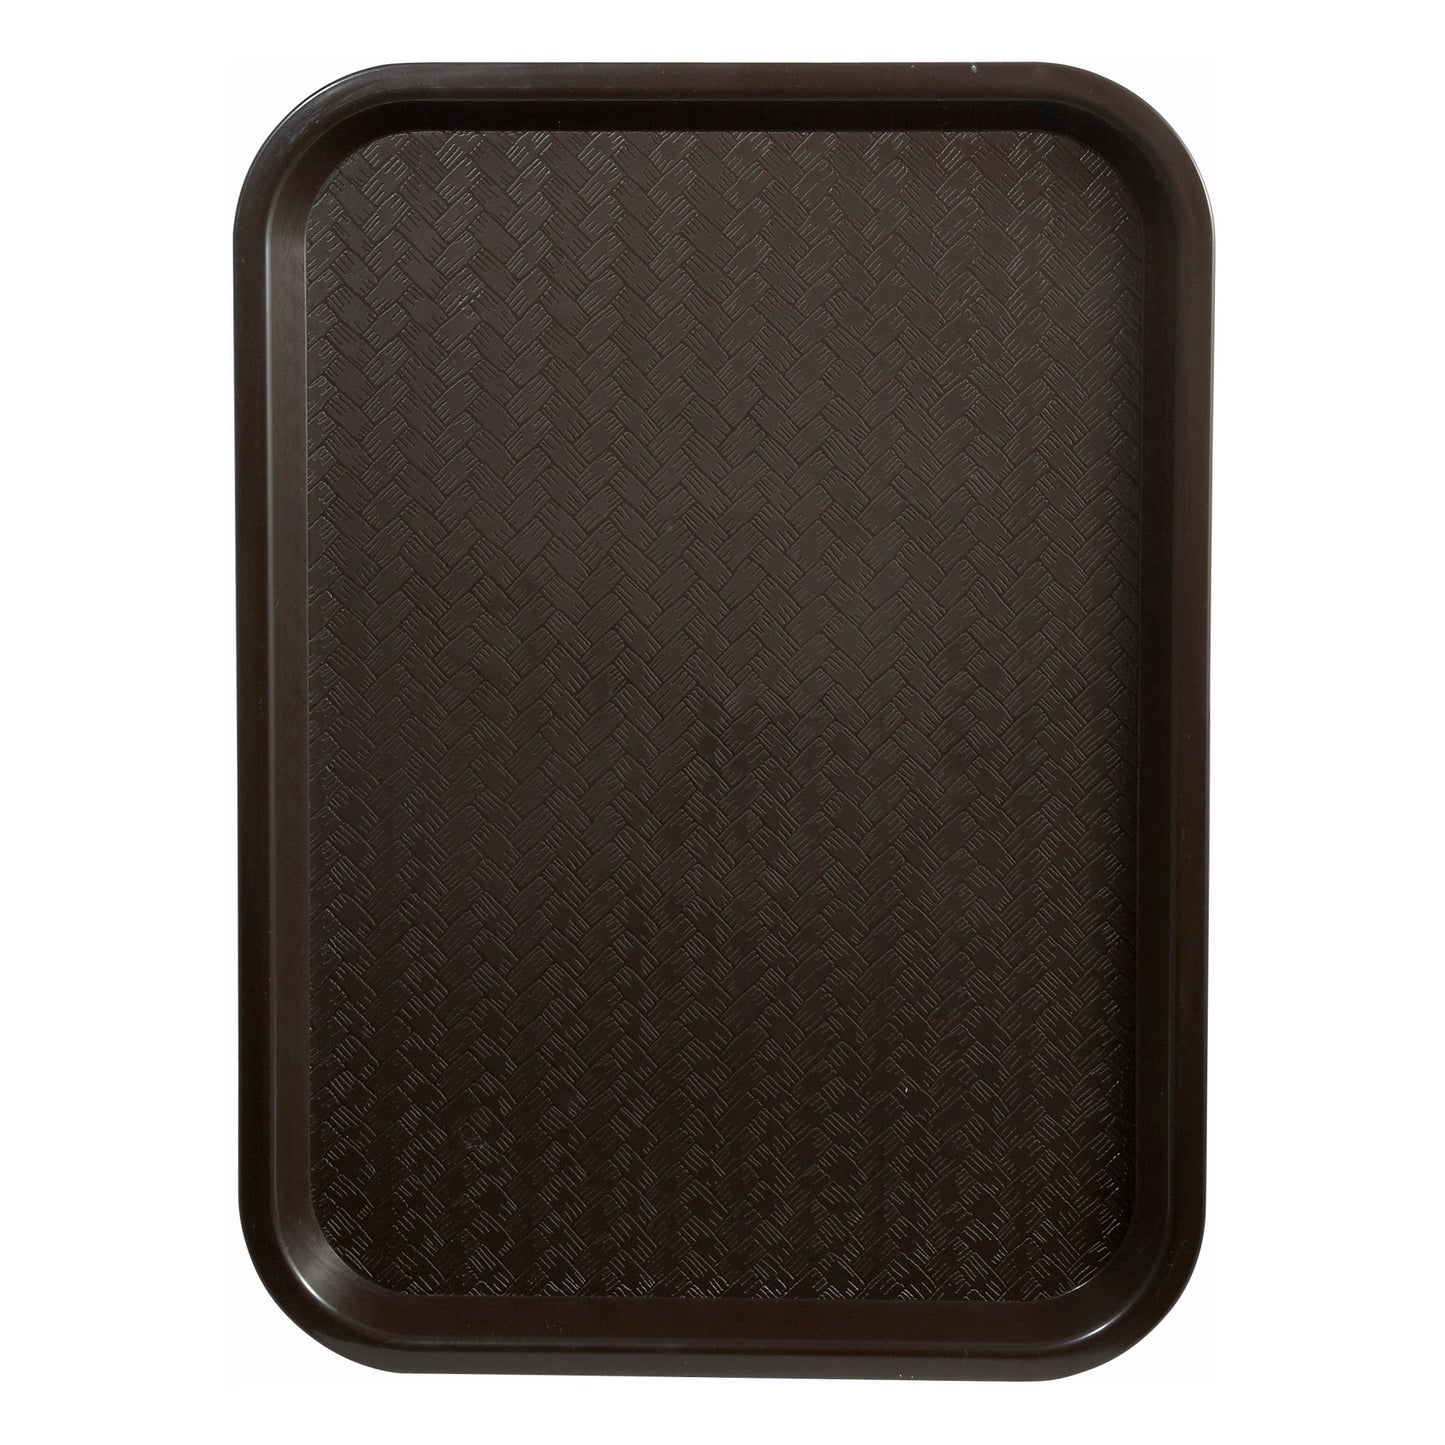 High Quality Plastic Cafeteria Tray - 12 x 16, Brown